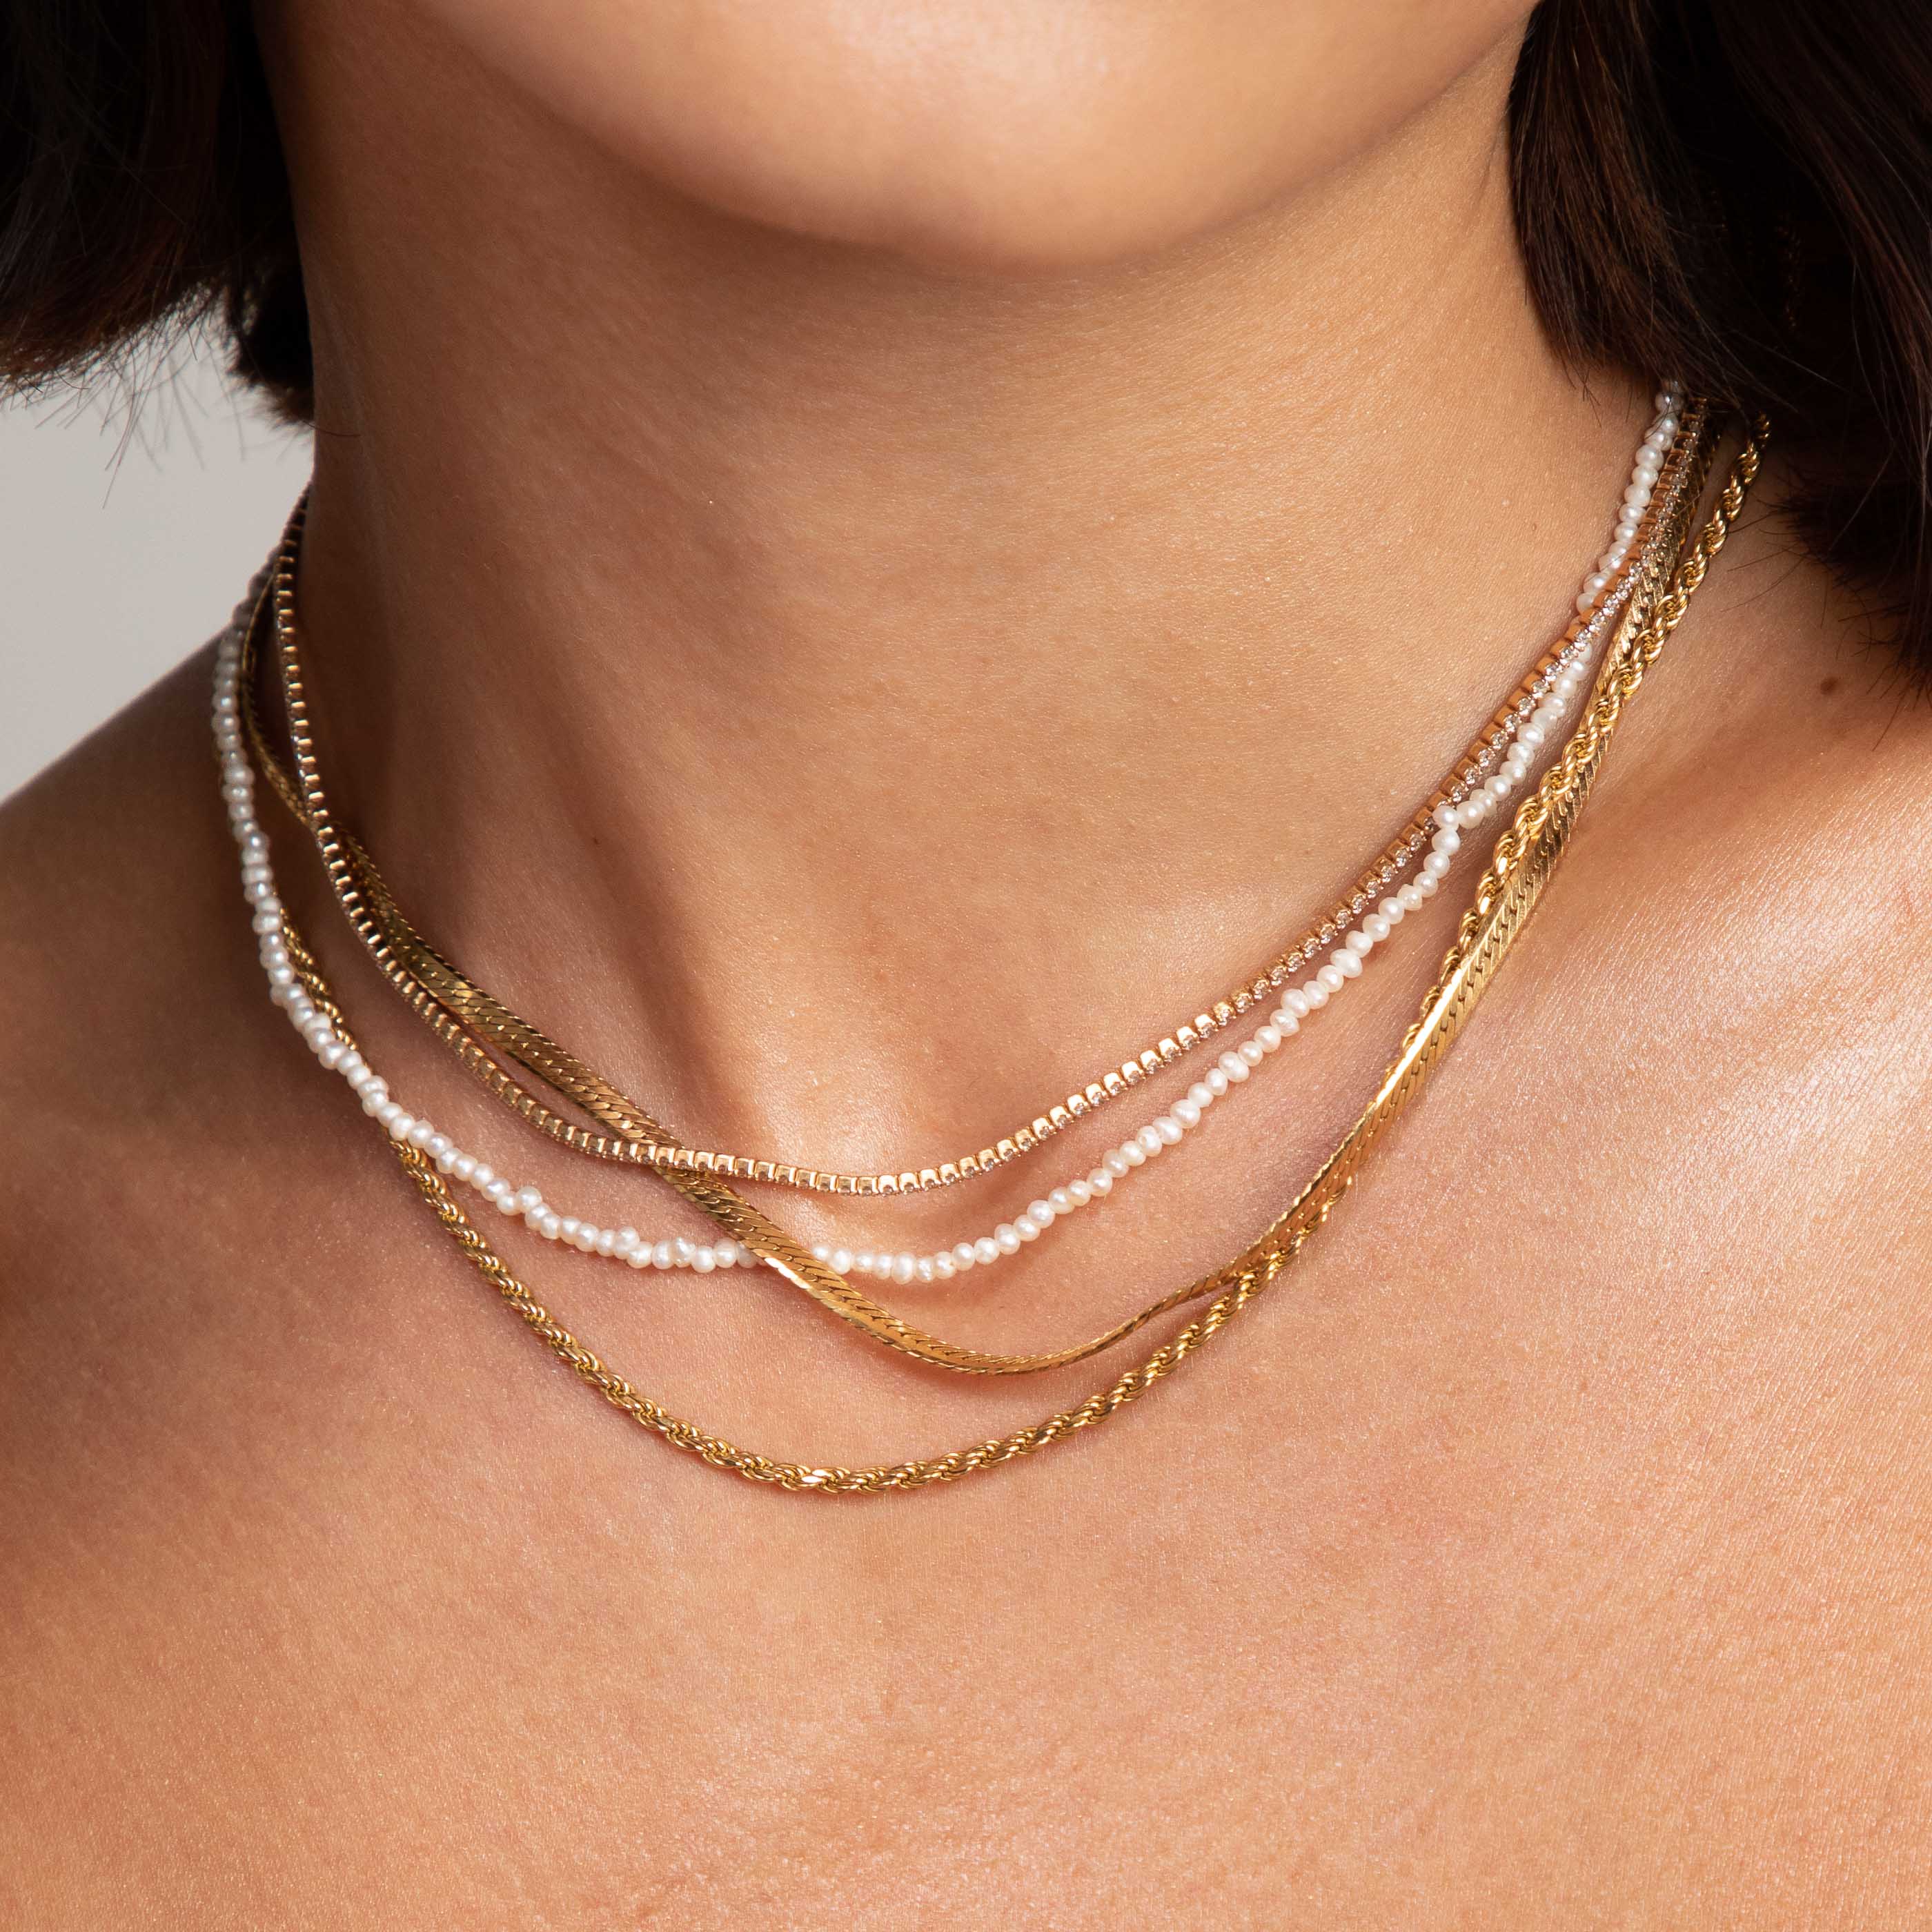 Radiant Pearl Necklace in Gold worn layered with necklaces